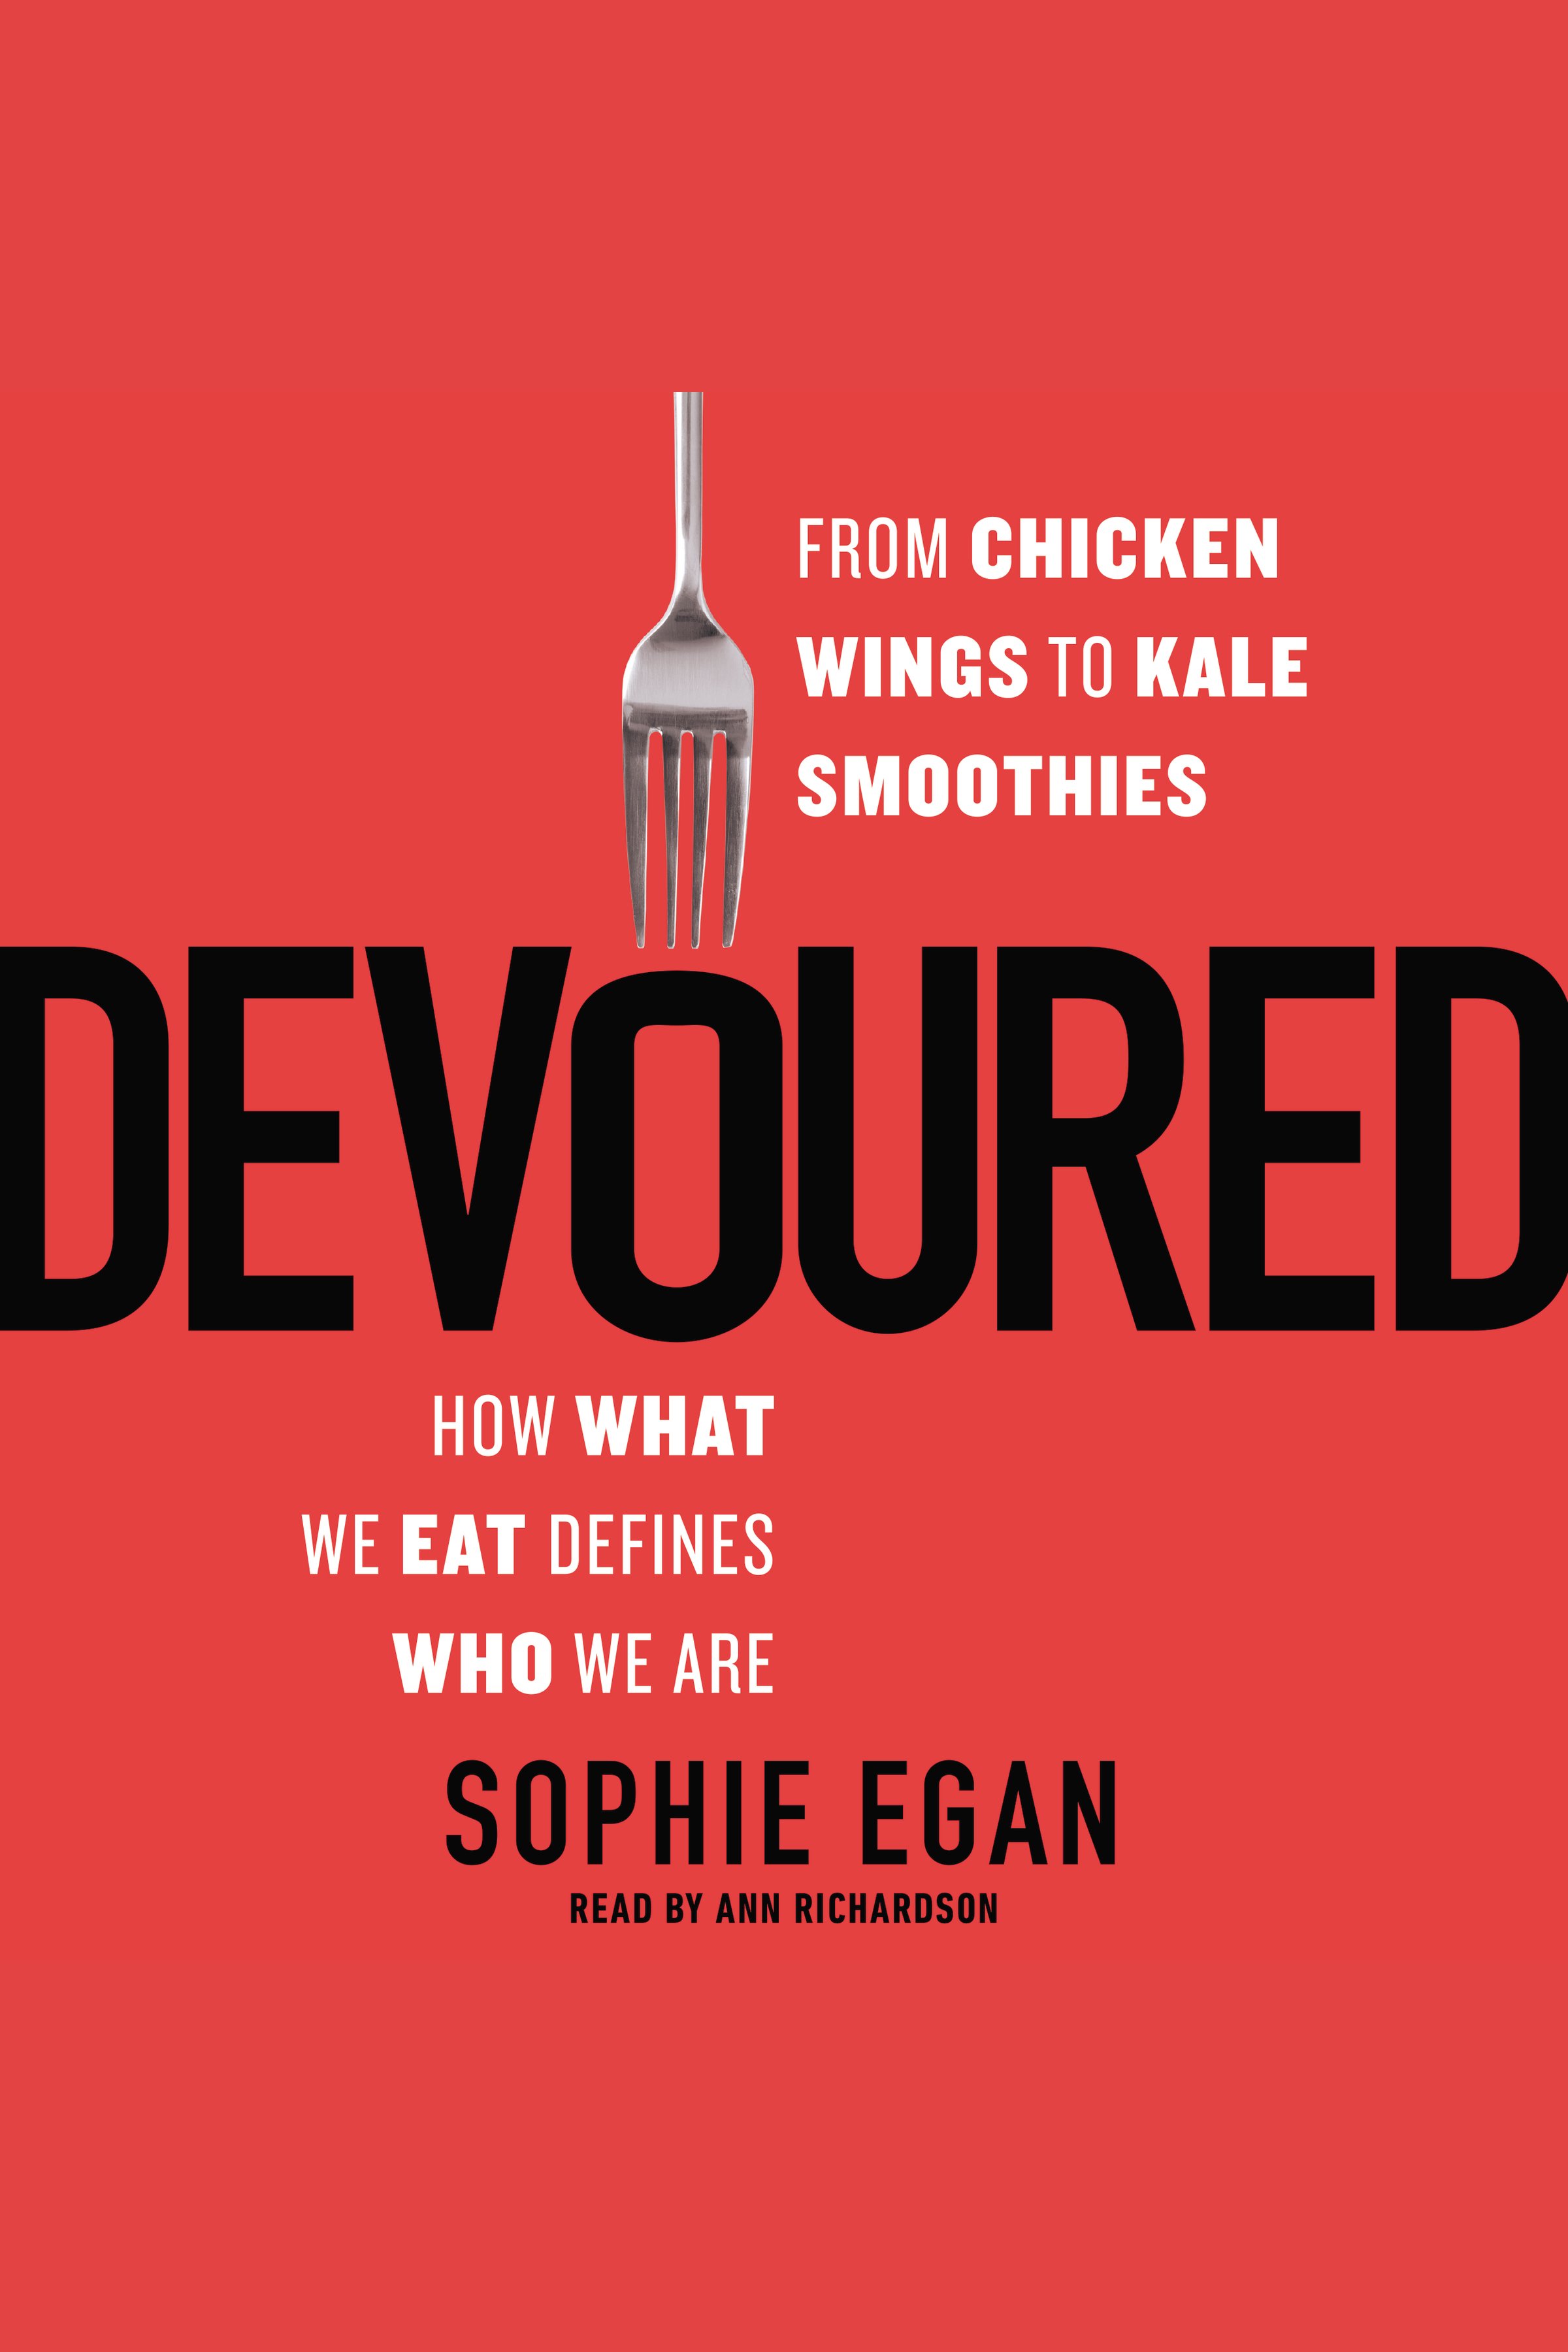 Umschlagbild für Devoured [electronic resource] : From Chicken Wings to Kale Smoothies - How What We Eat Defines Who We Are